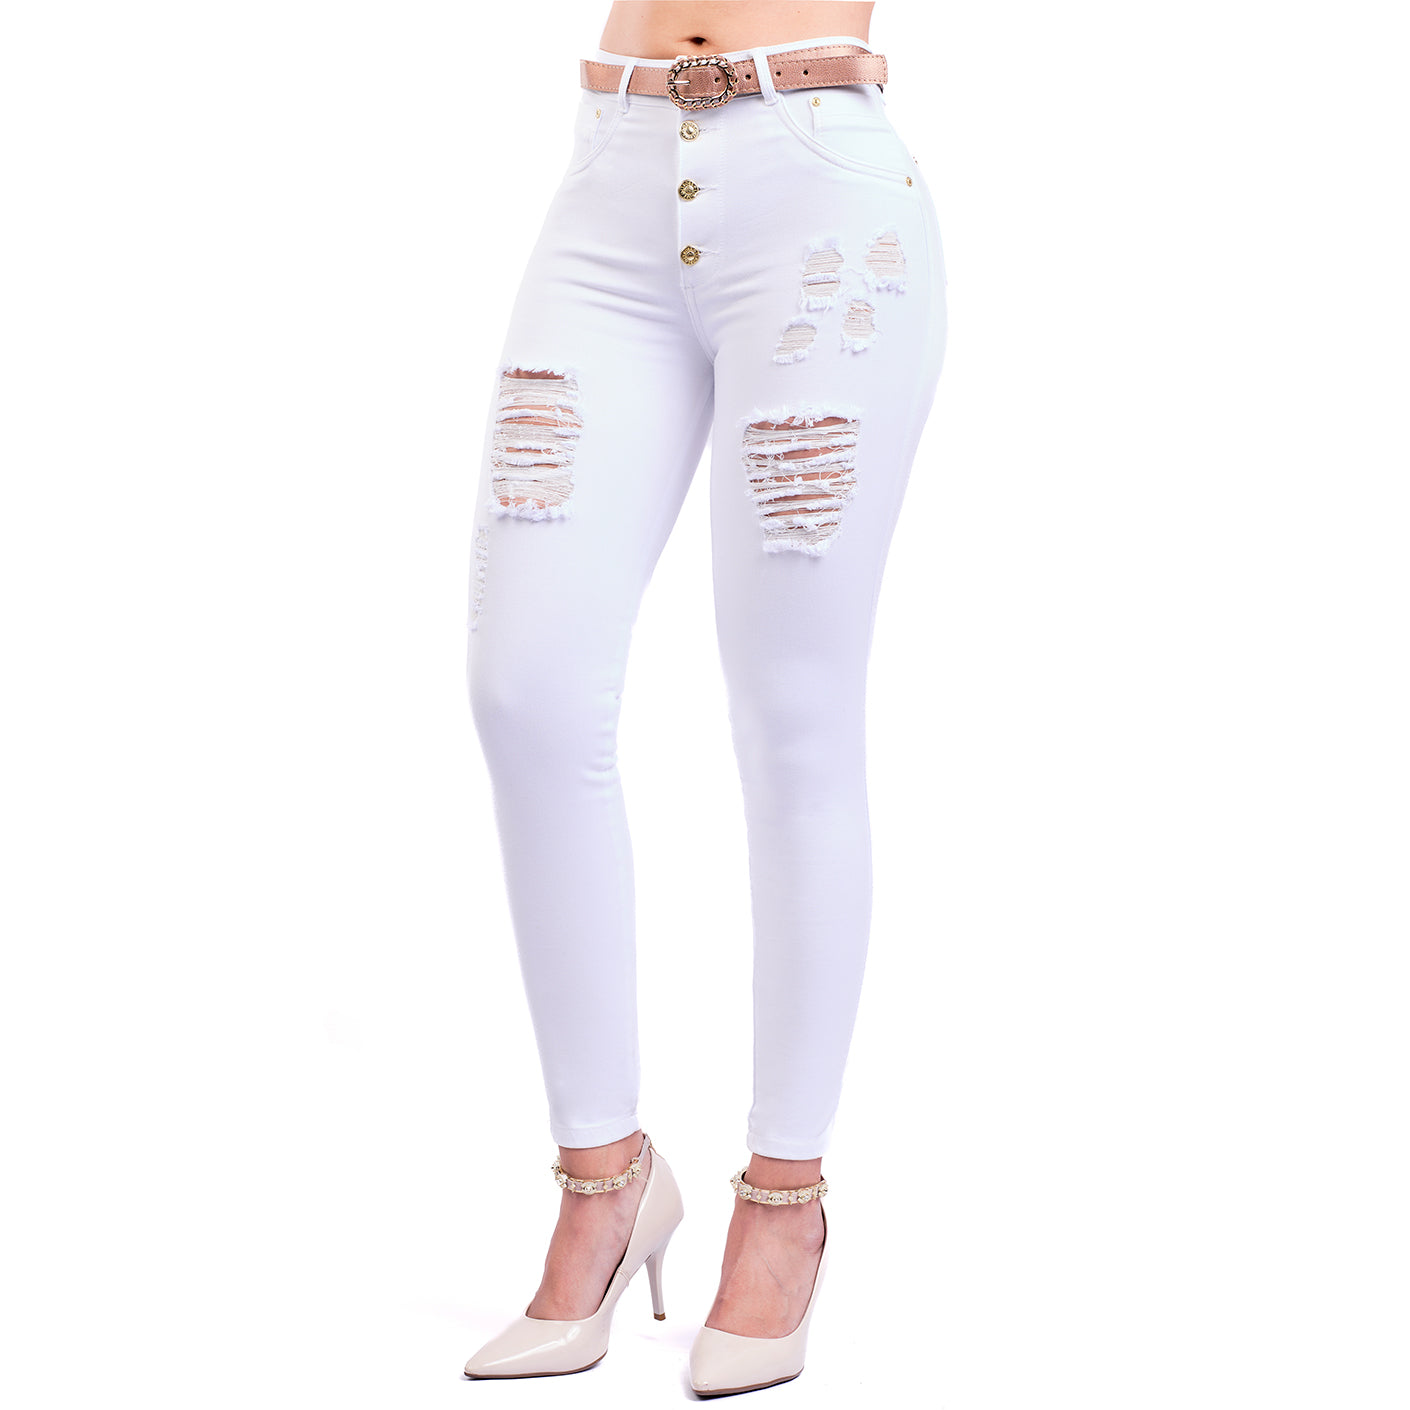 Fashionable Push-Up Cool Jeans